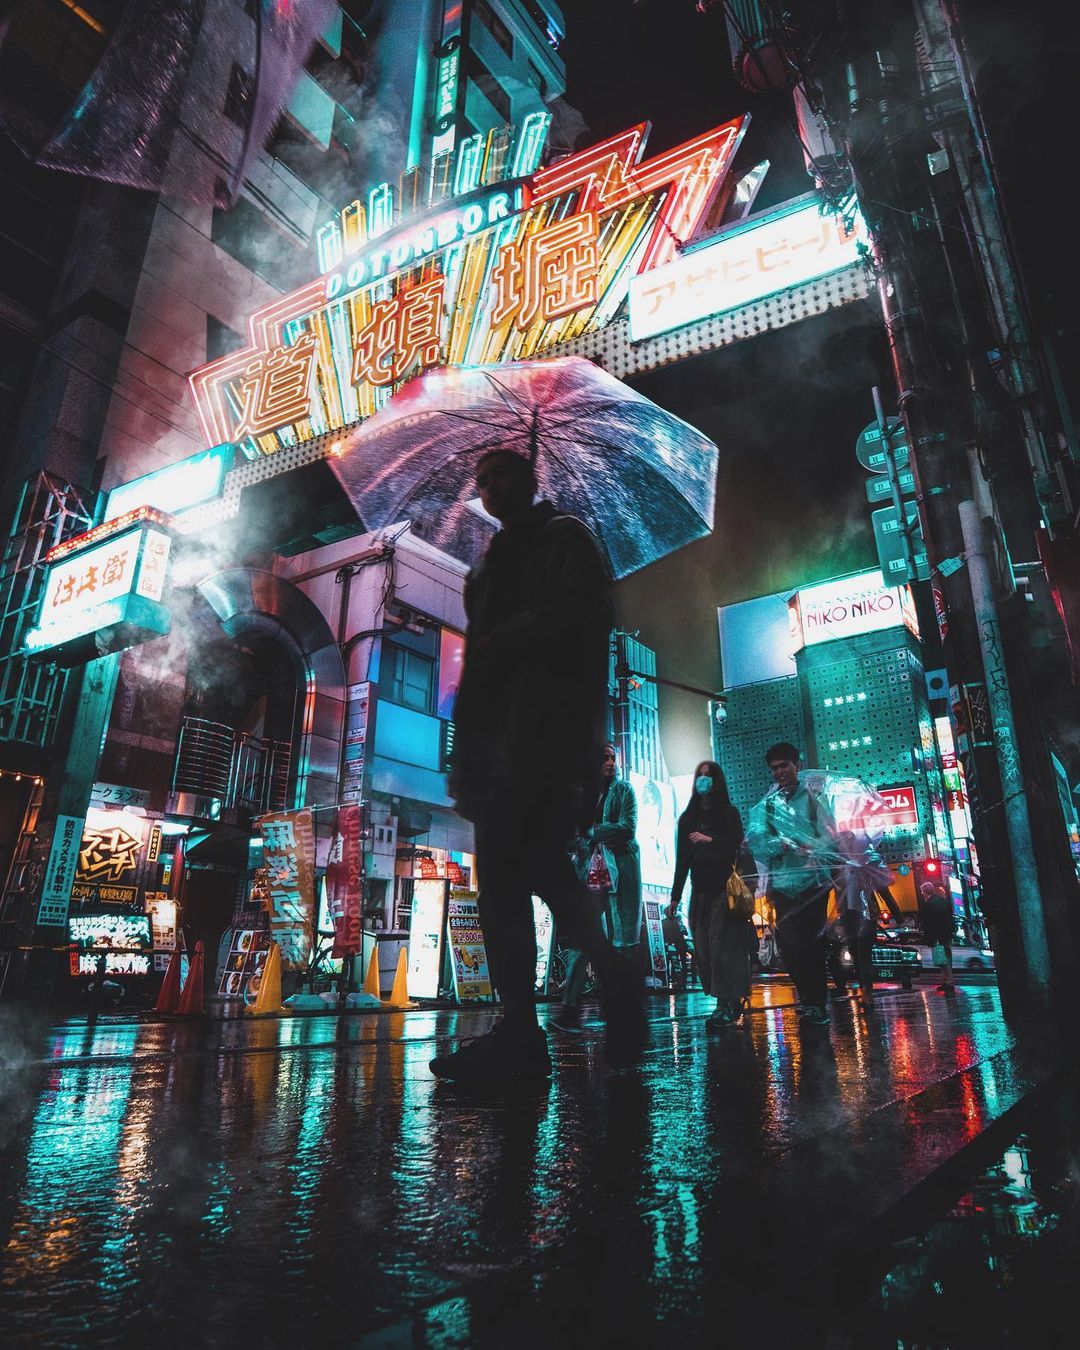 Omi Kim's Osaka, Japan Nocturnal landscapes with neon lights and rain